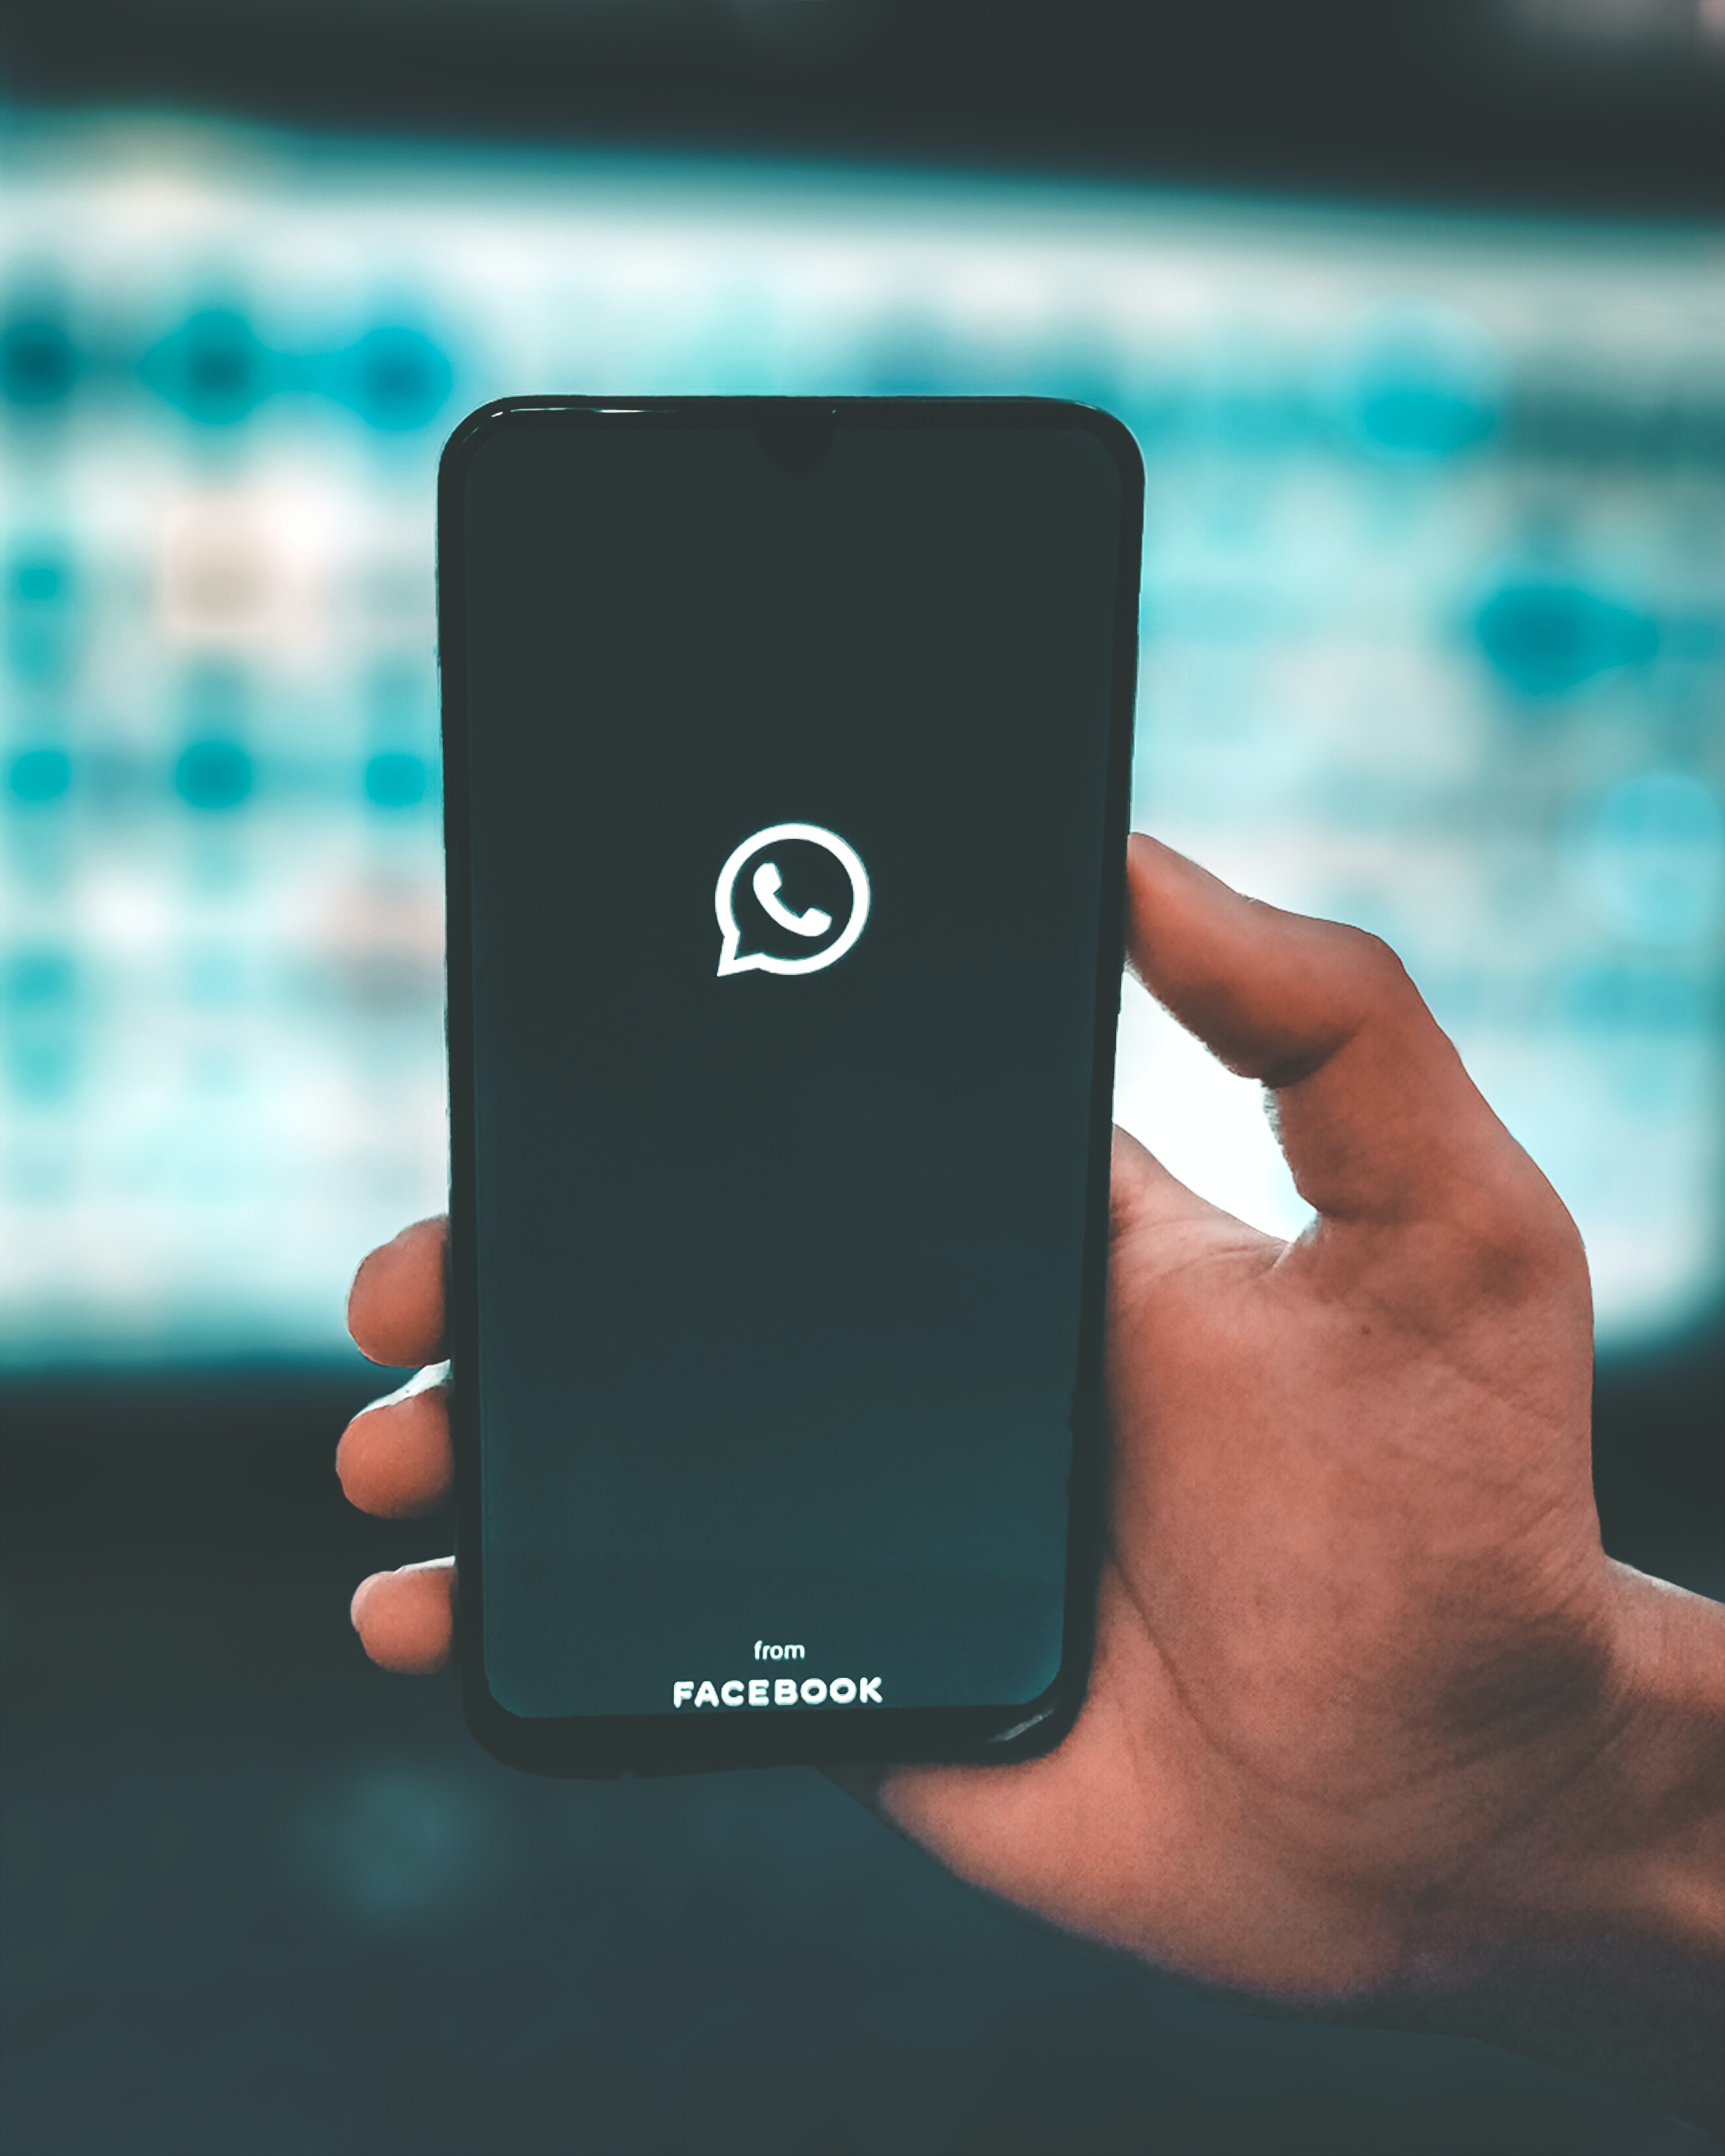 WhatsApp Likely To Introduce Picture-In-Picture Mode For All Users: Reports